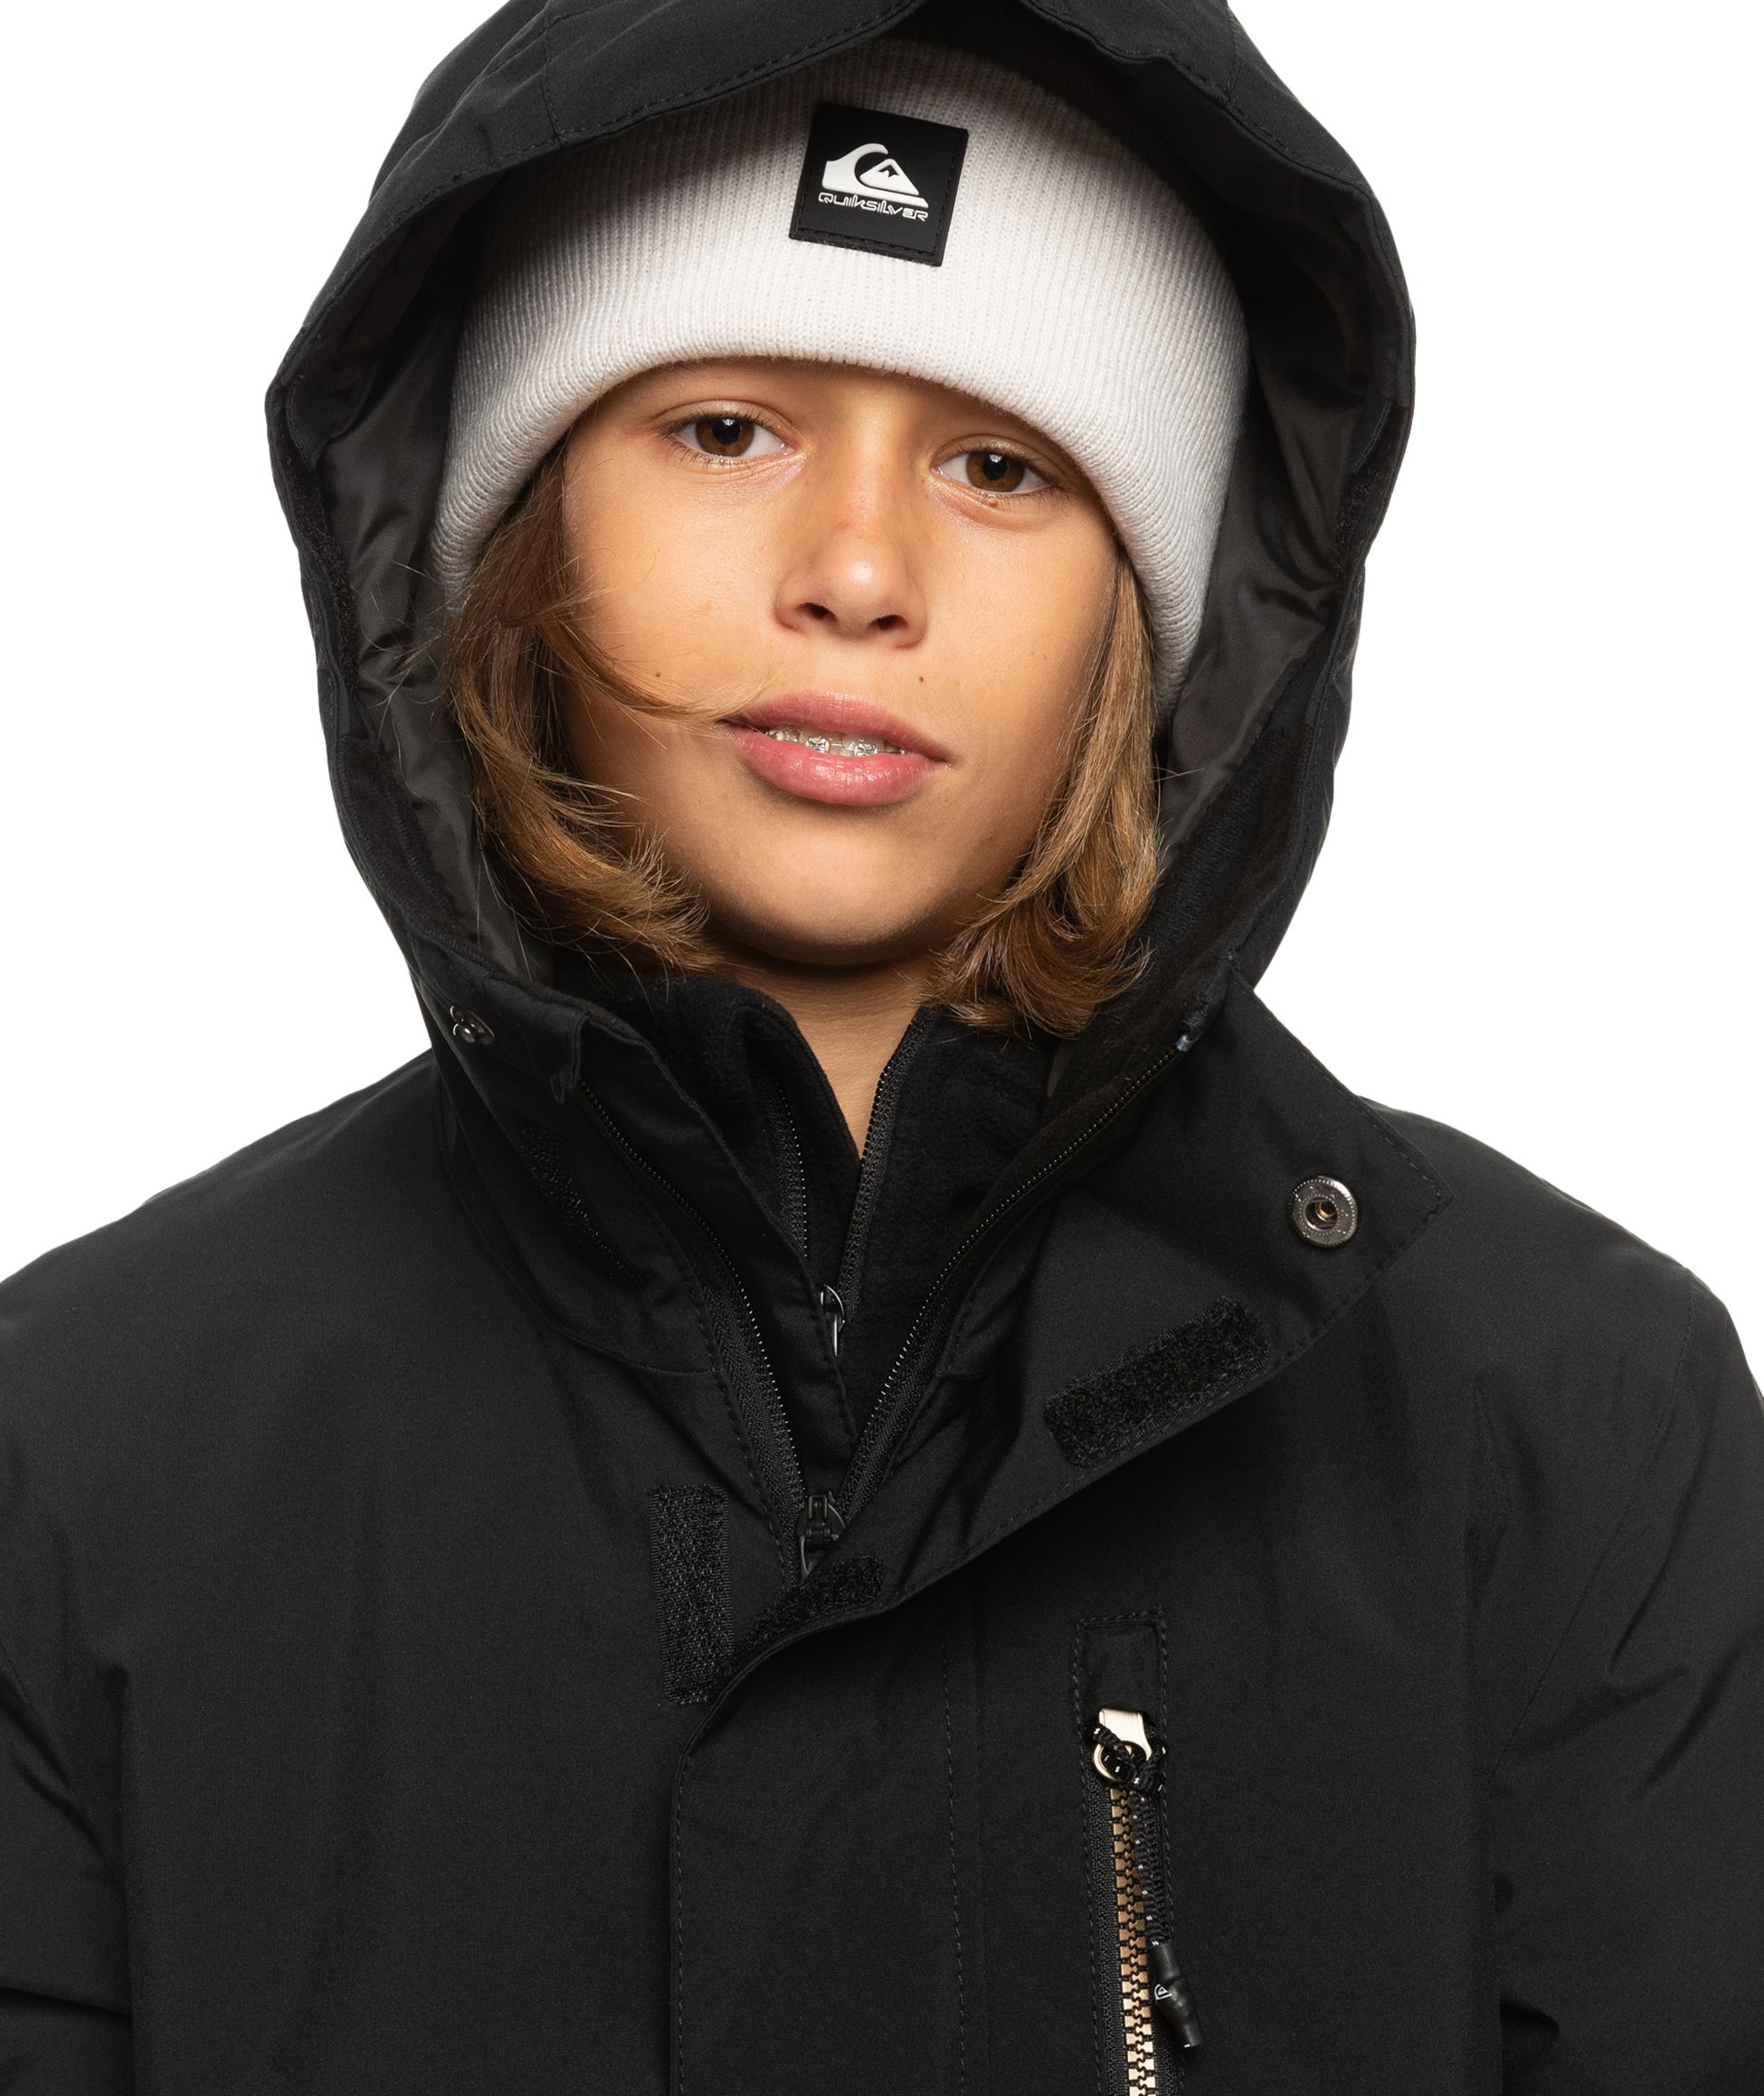 QUIKSILVER, J MISSION SOLID YOUTH JK